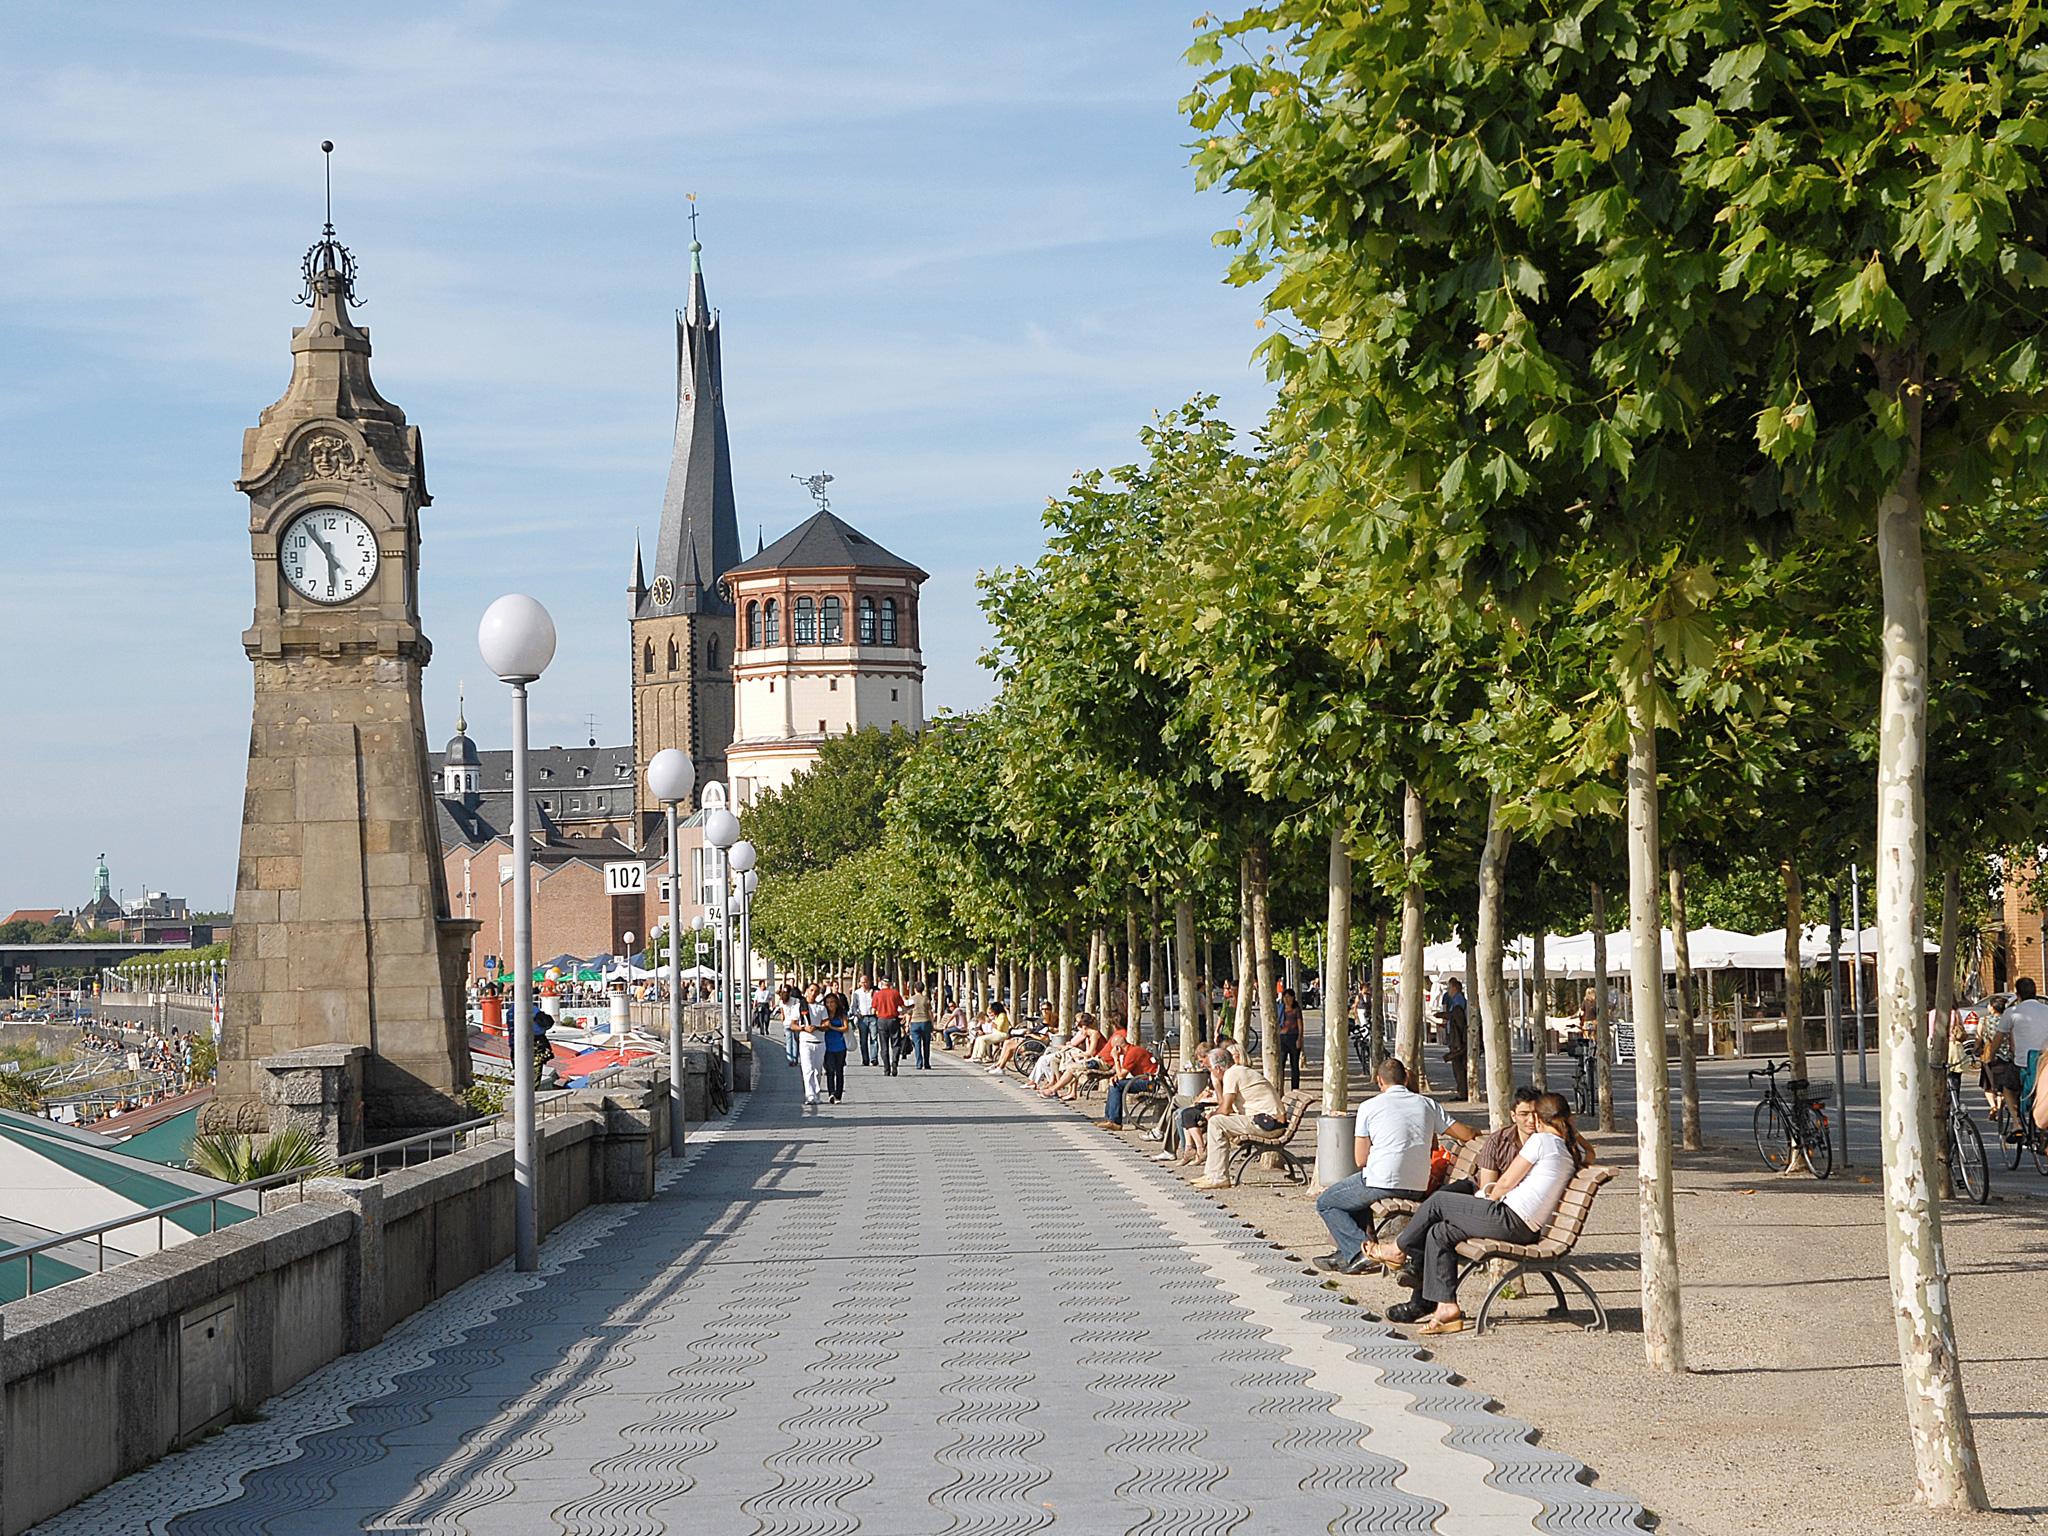 The 2017 Grand Depart took place along the Rhine